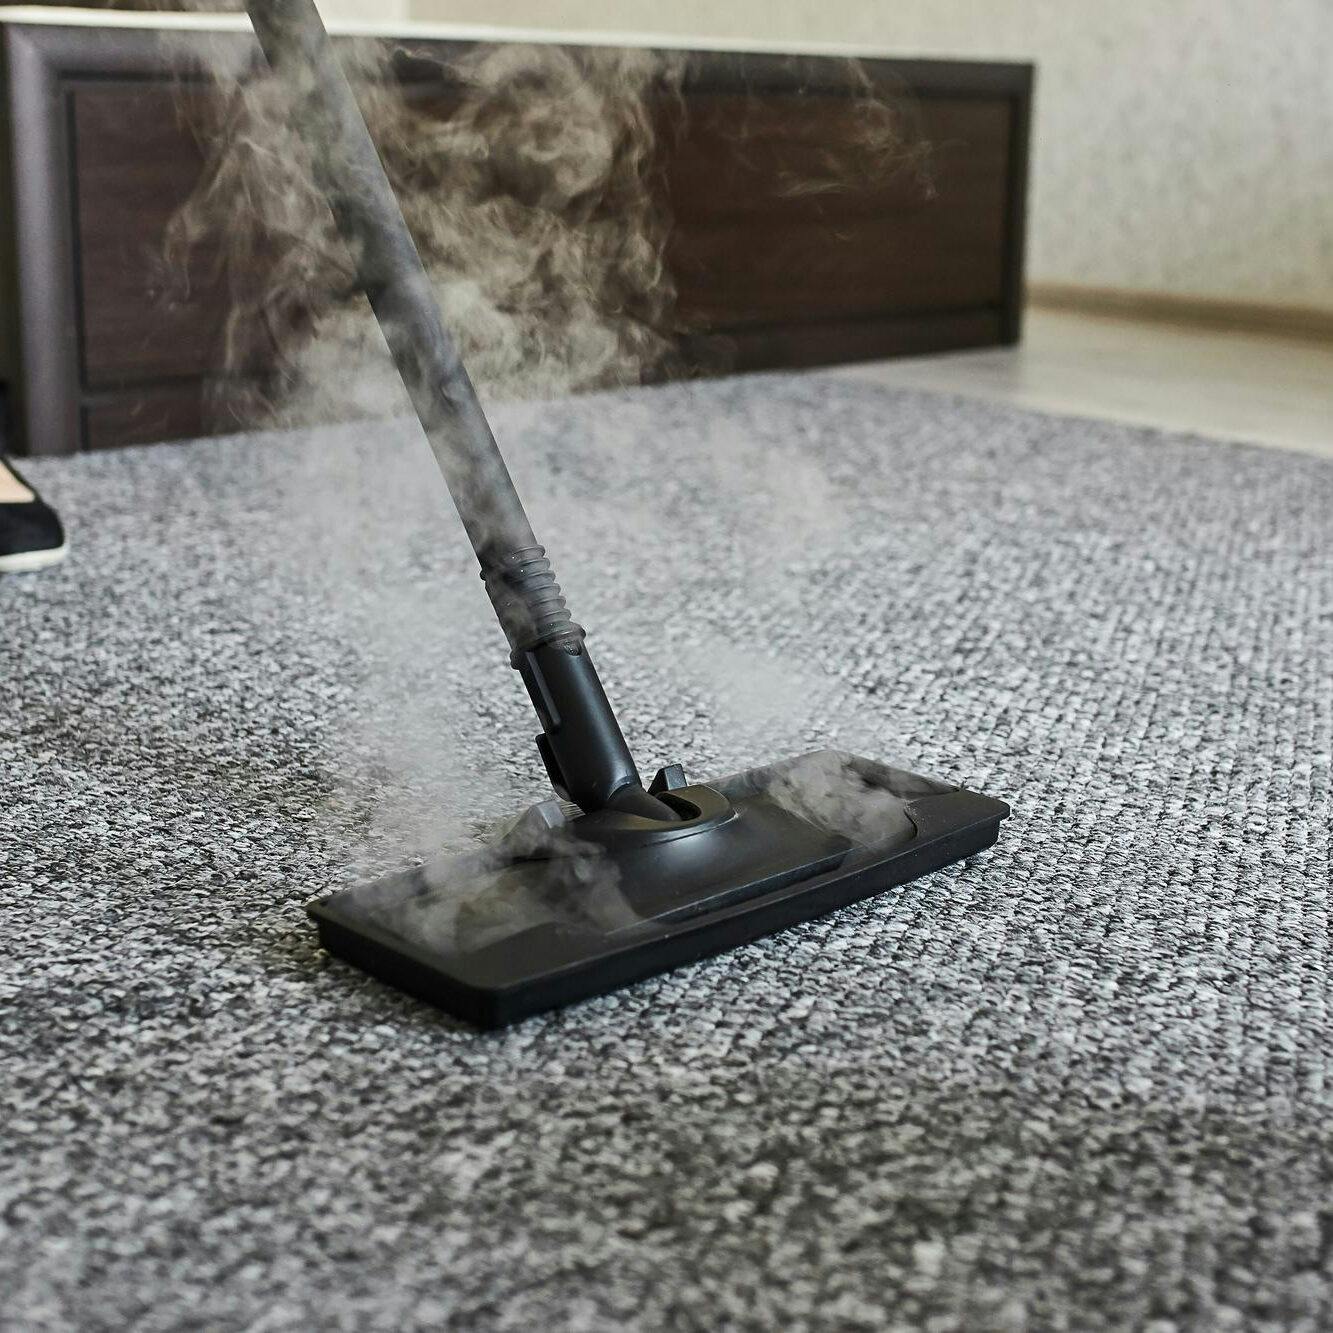 cleaning service company employee removing dirt from carpet in flat with professional steam cleaner